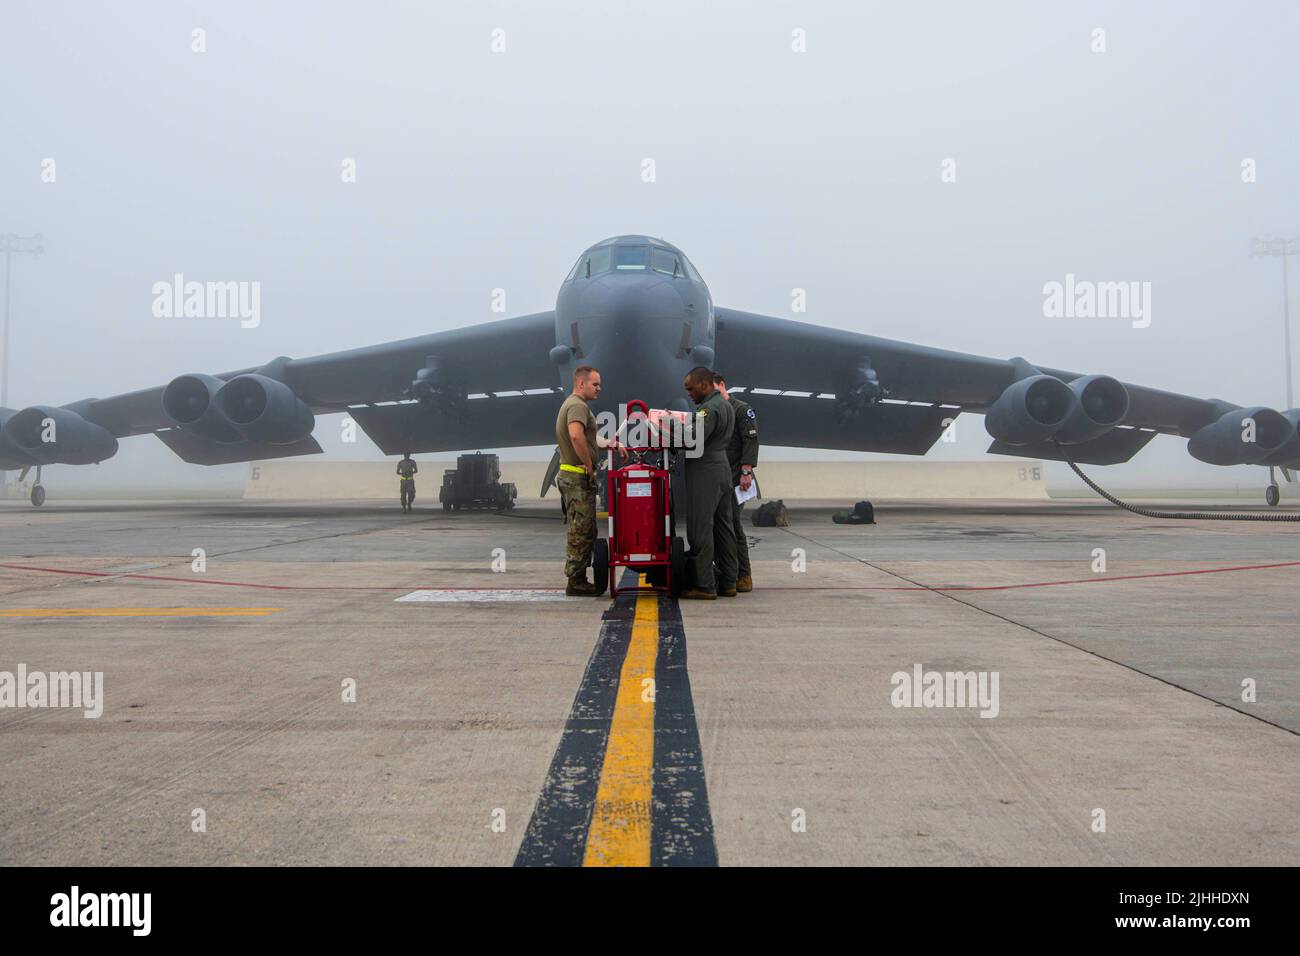 A B52H Stratofortress sits on a flight line preparing for flight at Minot Air Force Base, North Dakota, July 15, 2022. The B52H stands 45 feet tall, has a wingspan of 187 feet and the wings can flex up to 5 feet up up and down. (U.S. Air Force photo by Airman 1st class Alexander Nottingham) Stock Photo